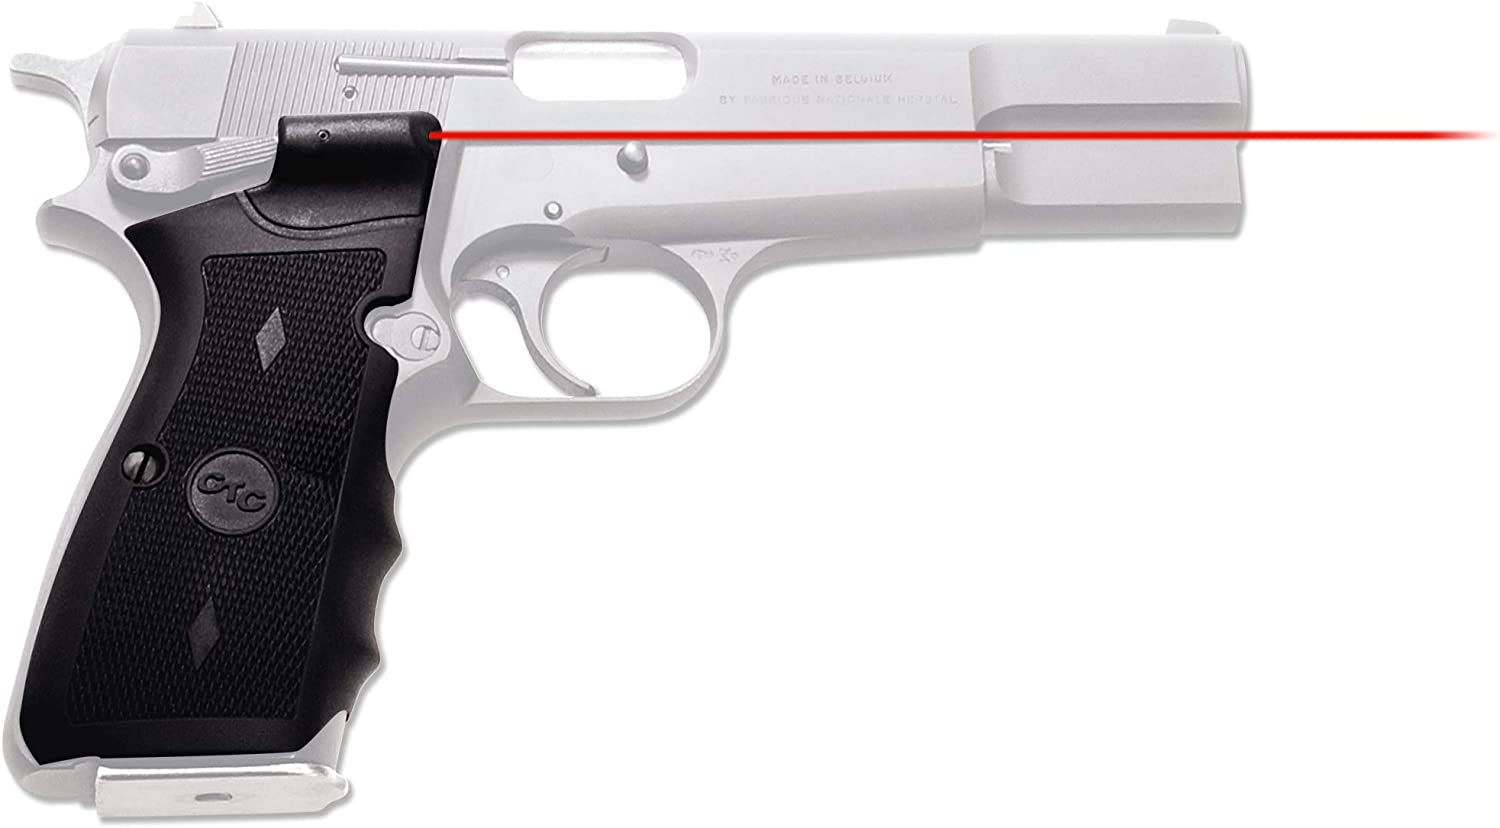 Crimson Trace LG-309 for Browning Hi-Power